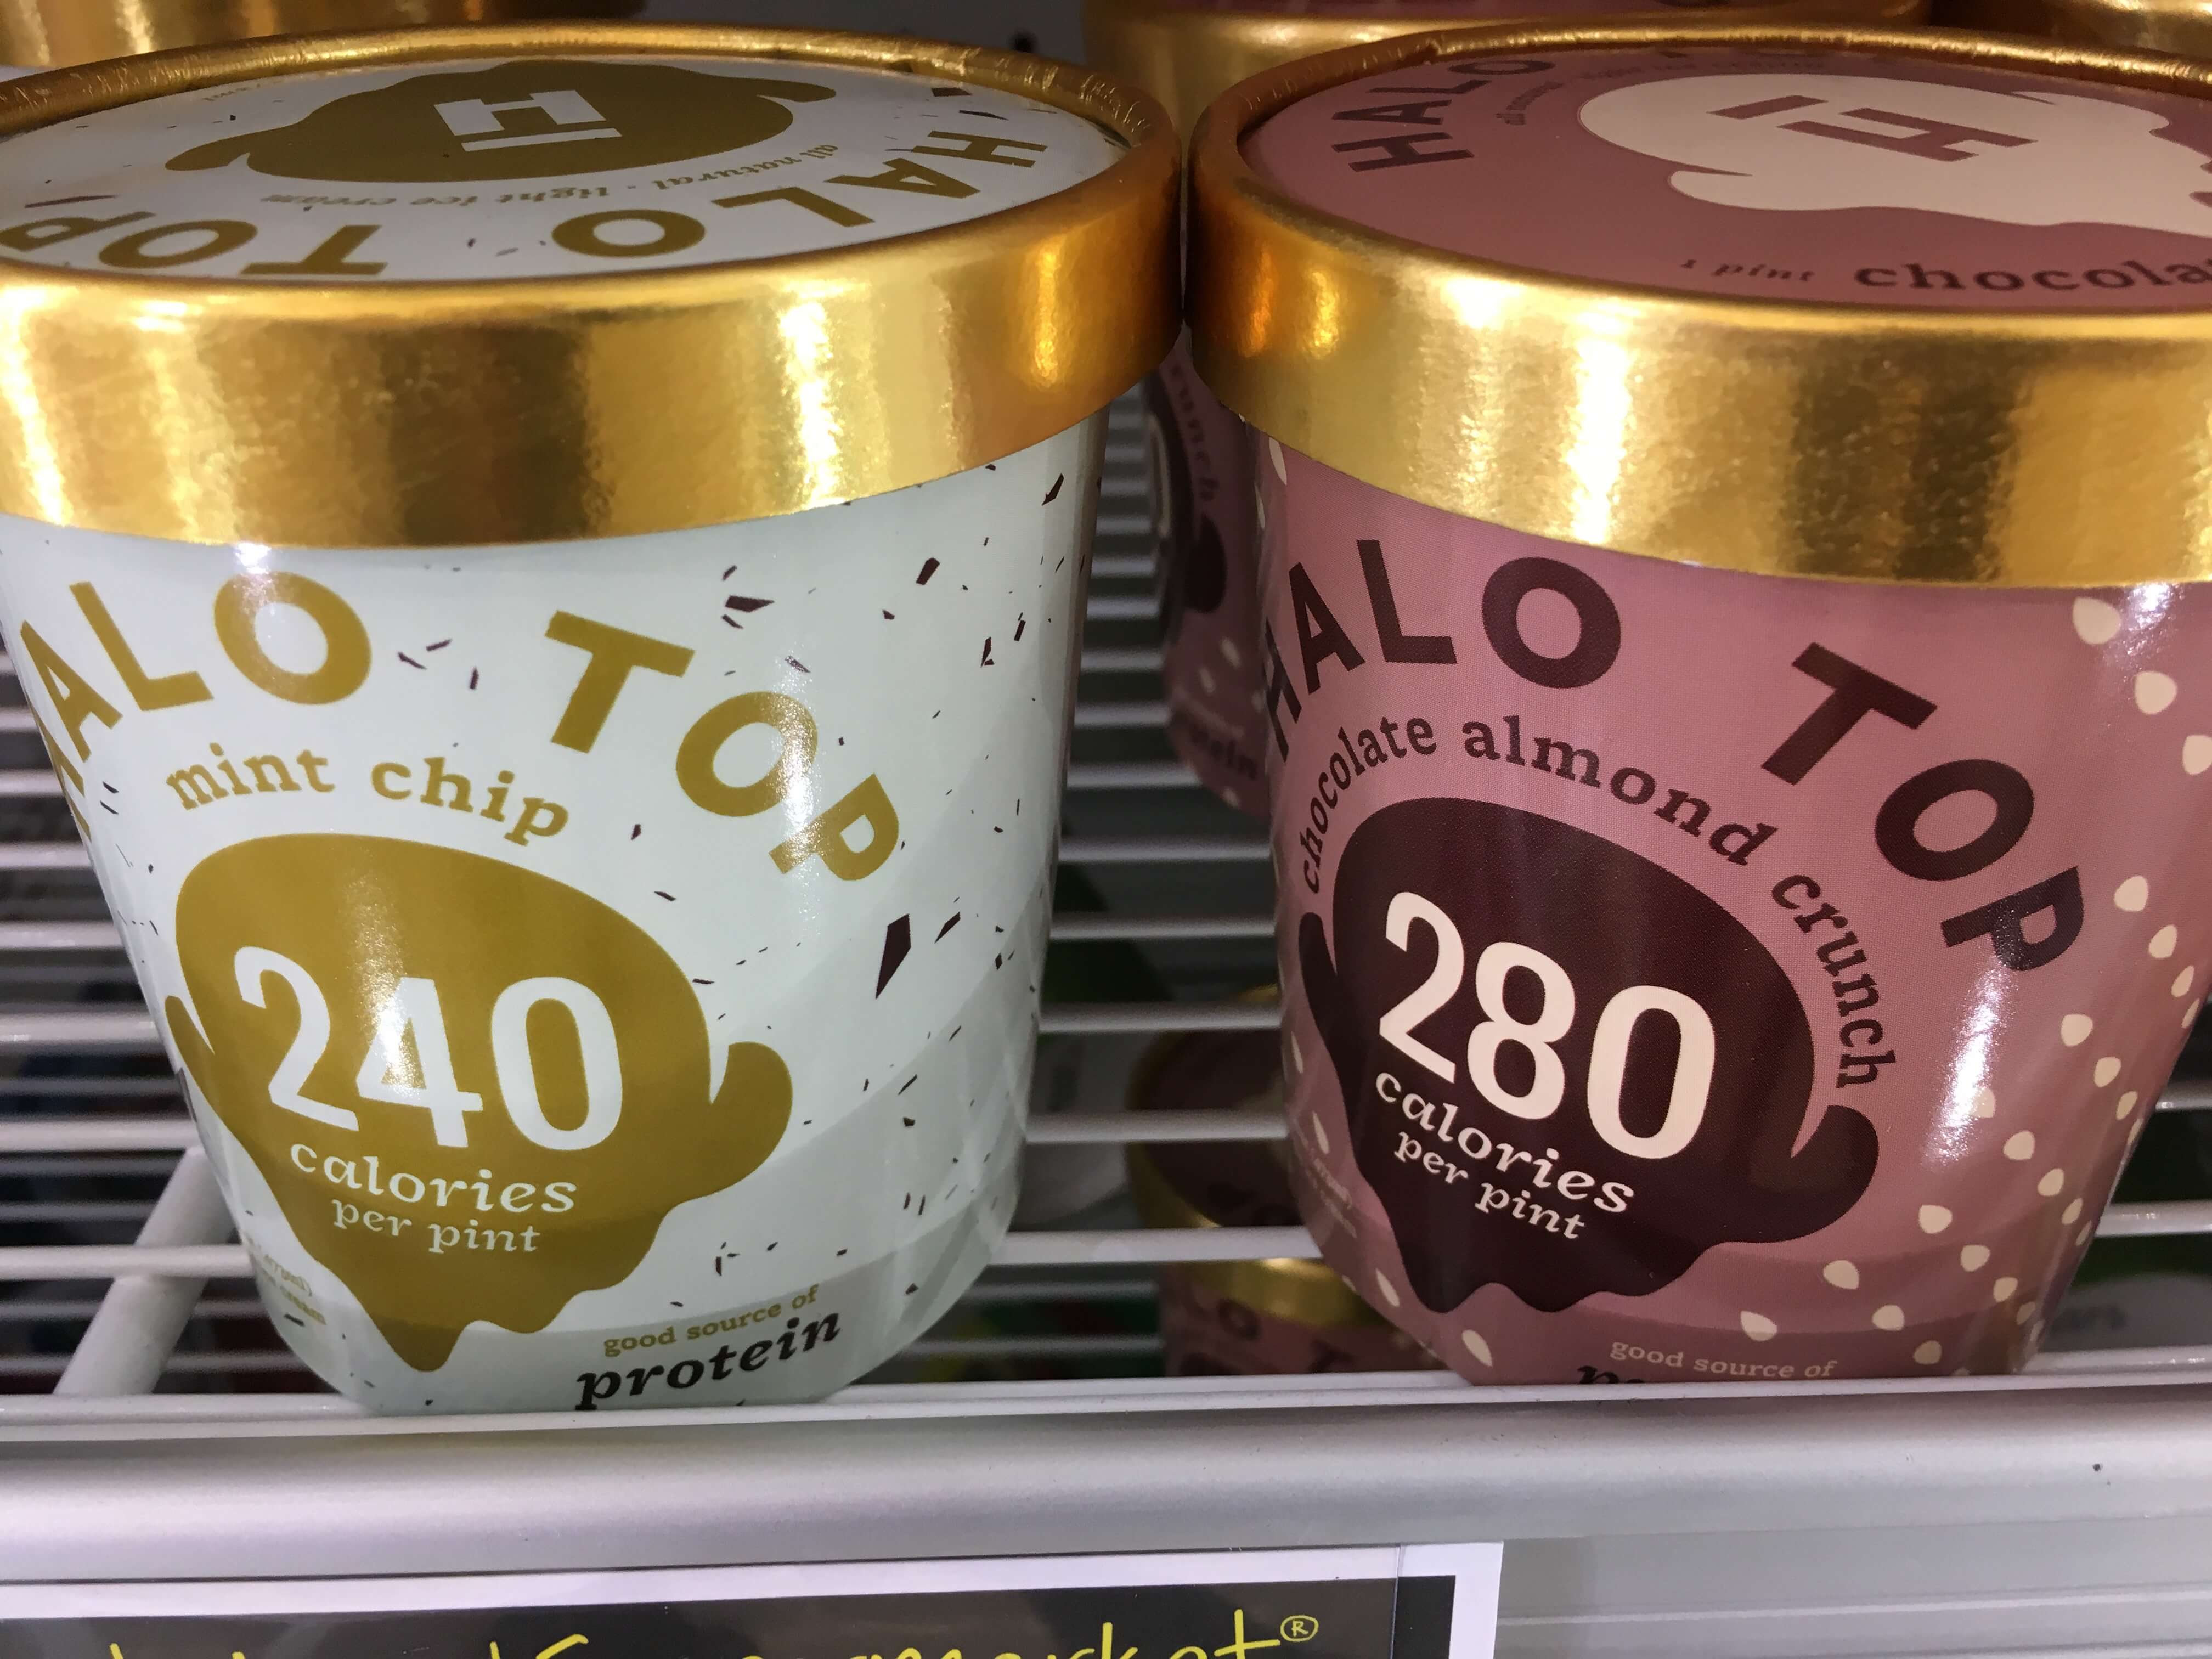 Halo Top Ice Cream as Low as 2.99 at Stop & Shop, Giant and Martin